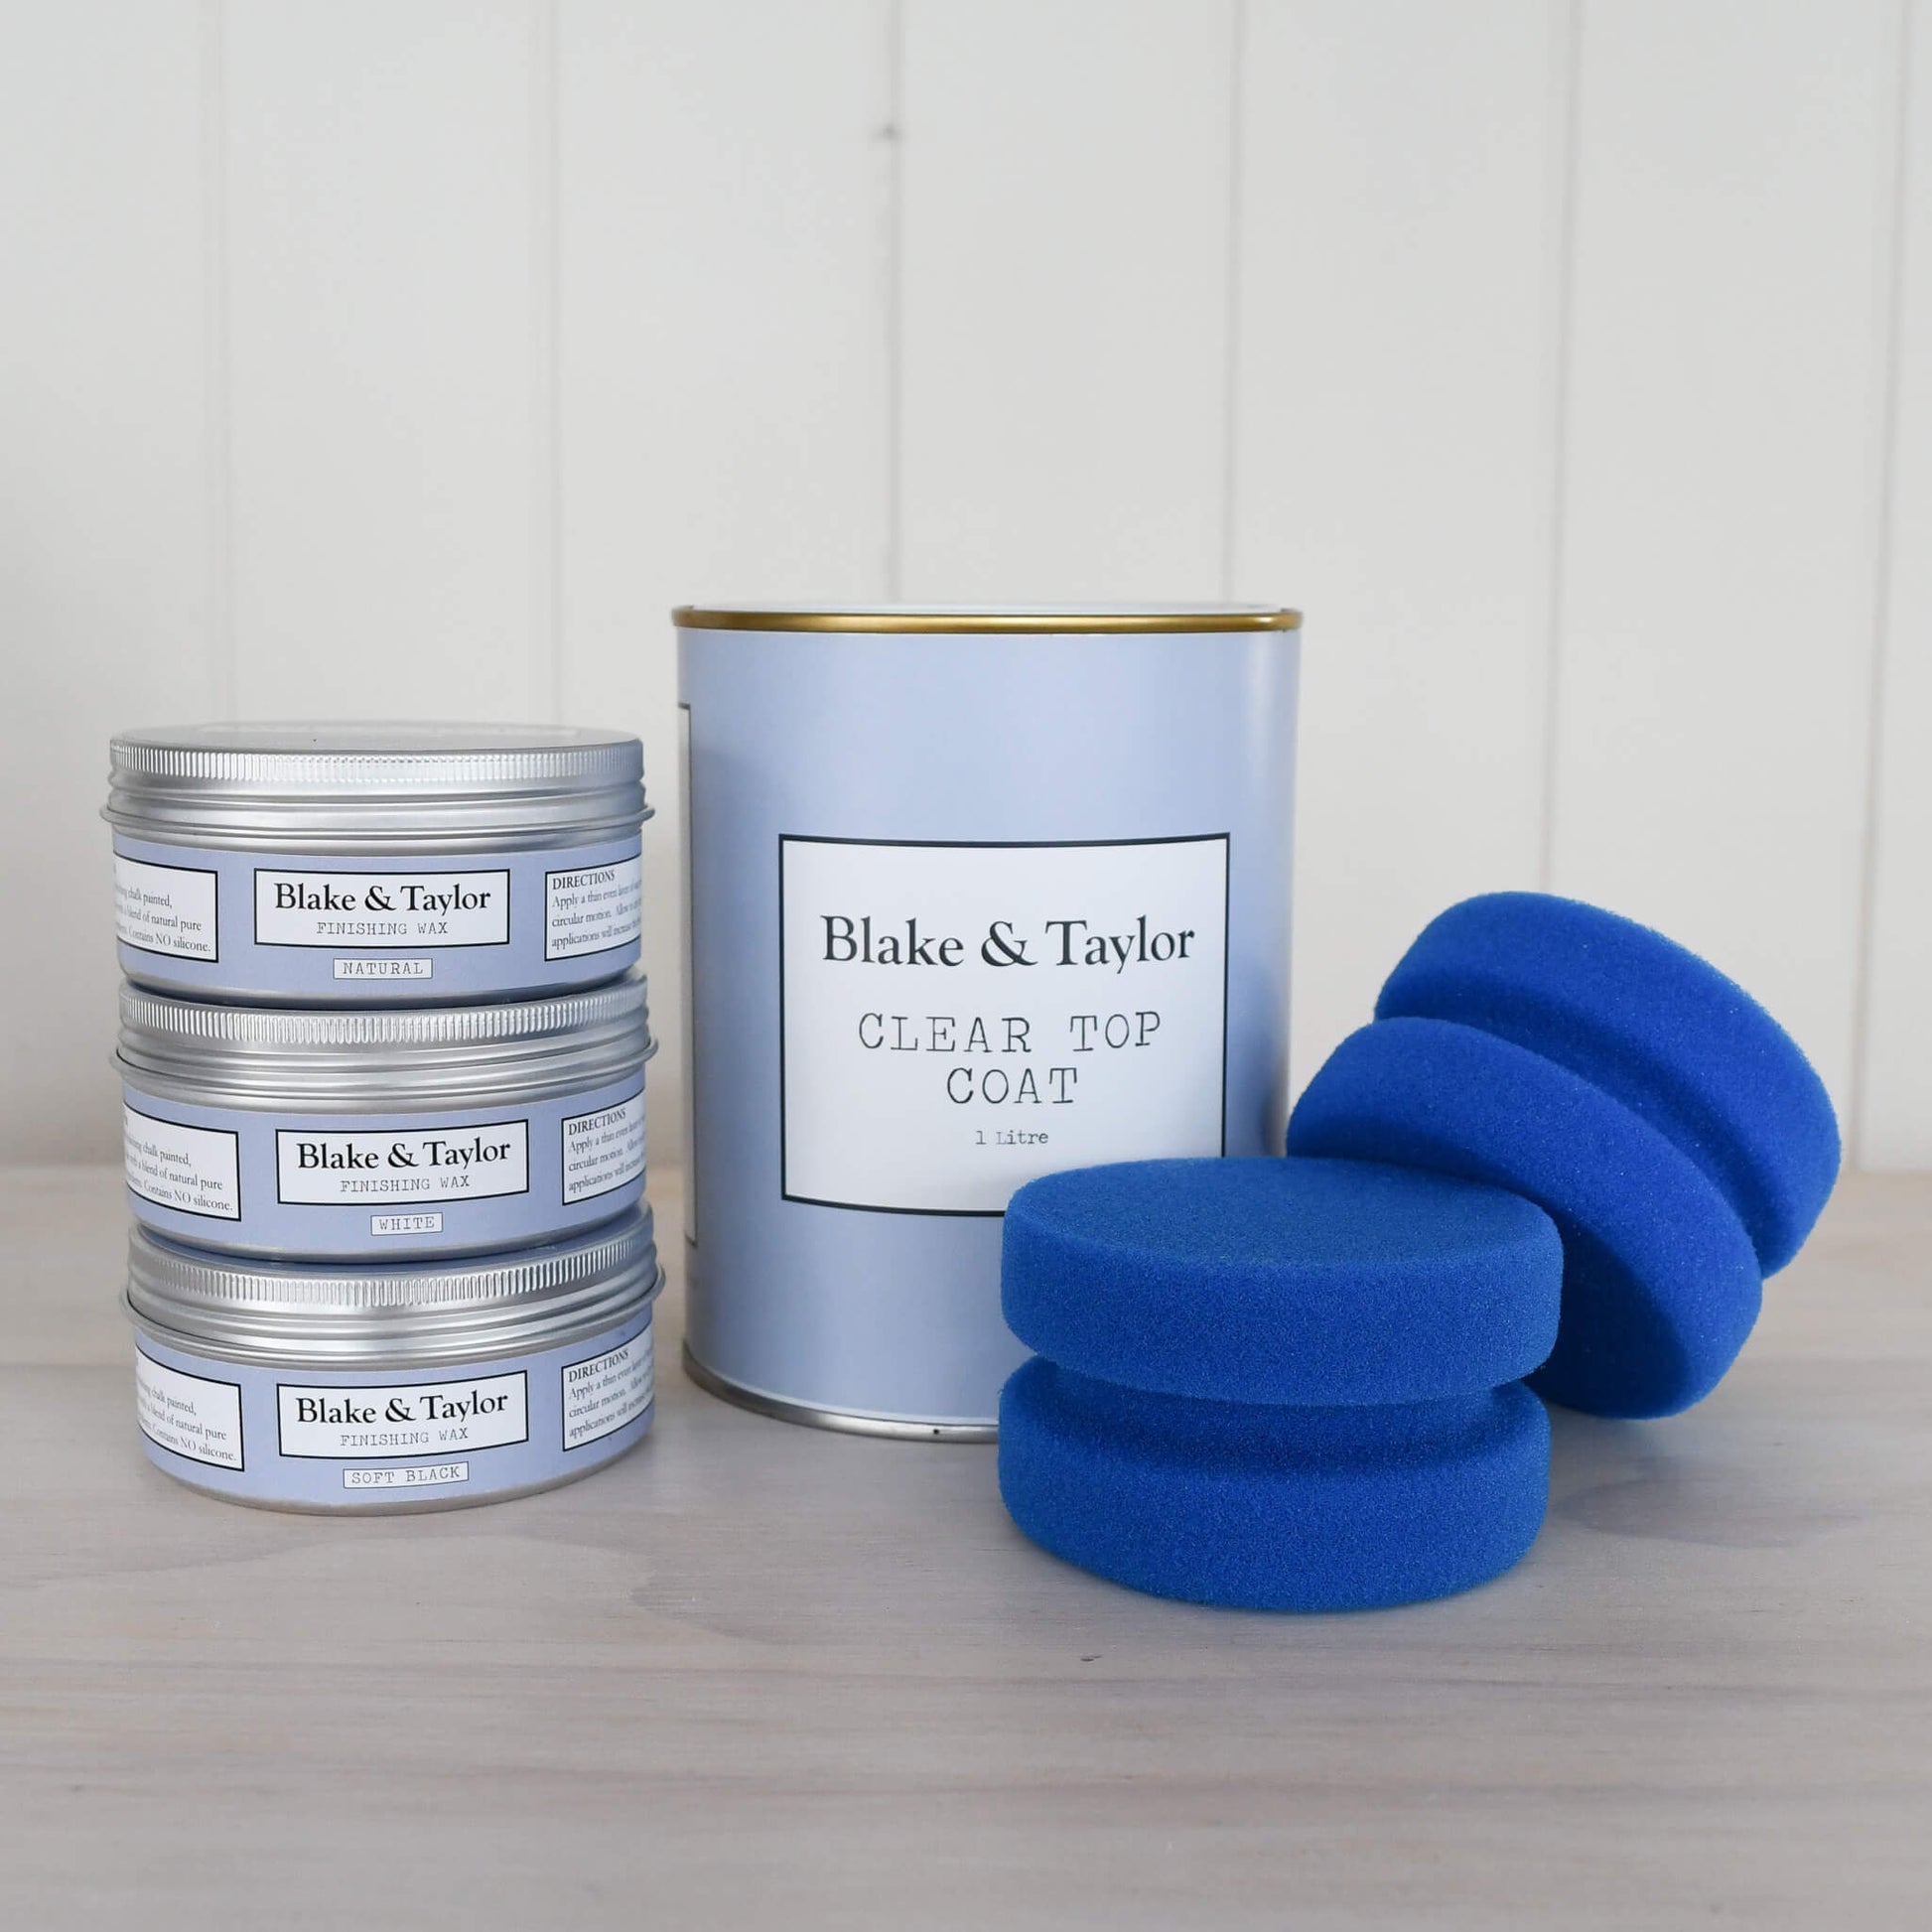 Blake & Taylor Chalk Furniture Paint Sponge applicators with a tin of Clear Top Coat and waxes